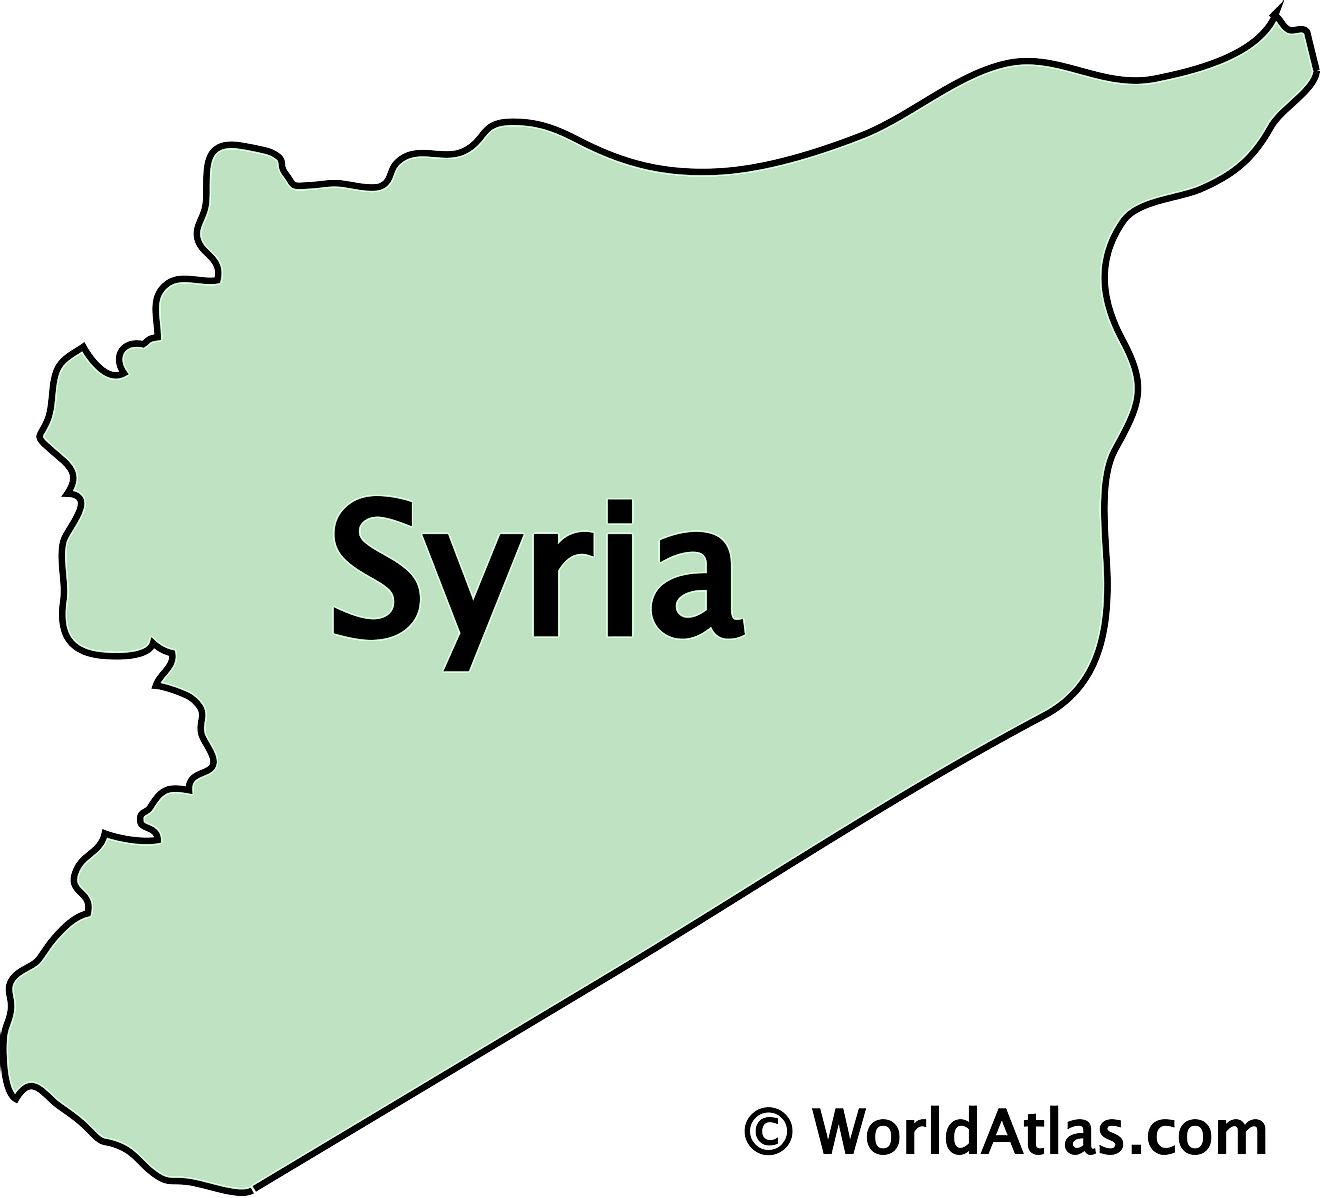 Outline Map of Syria